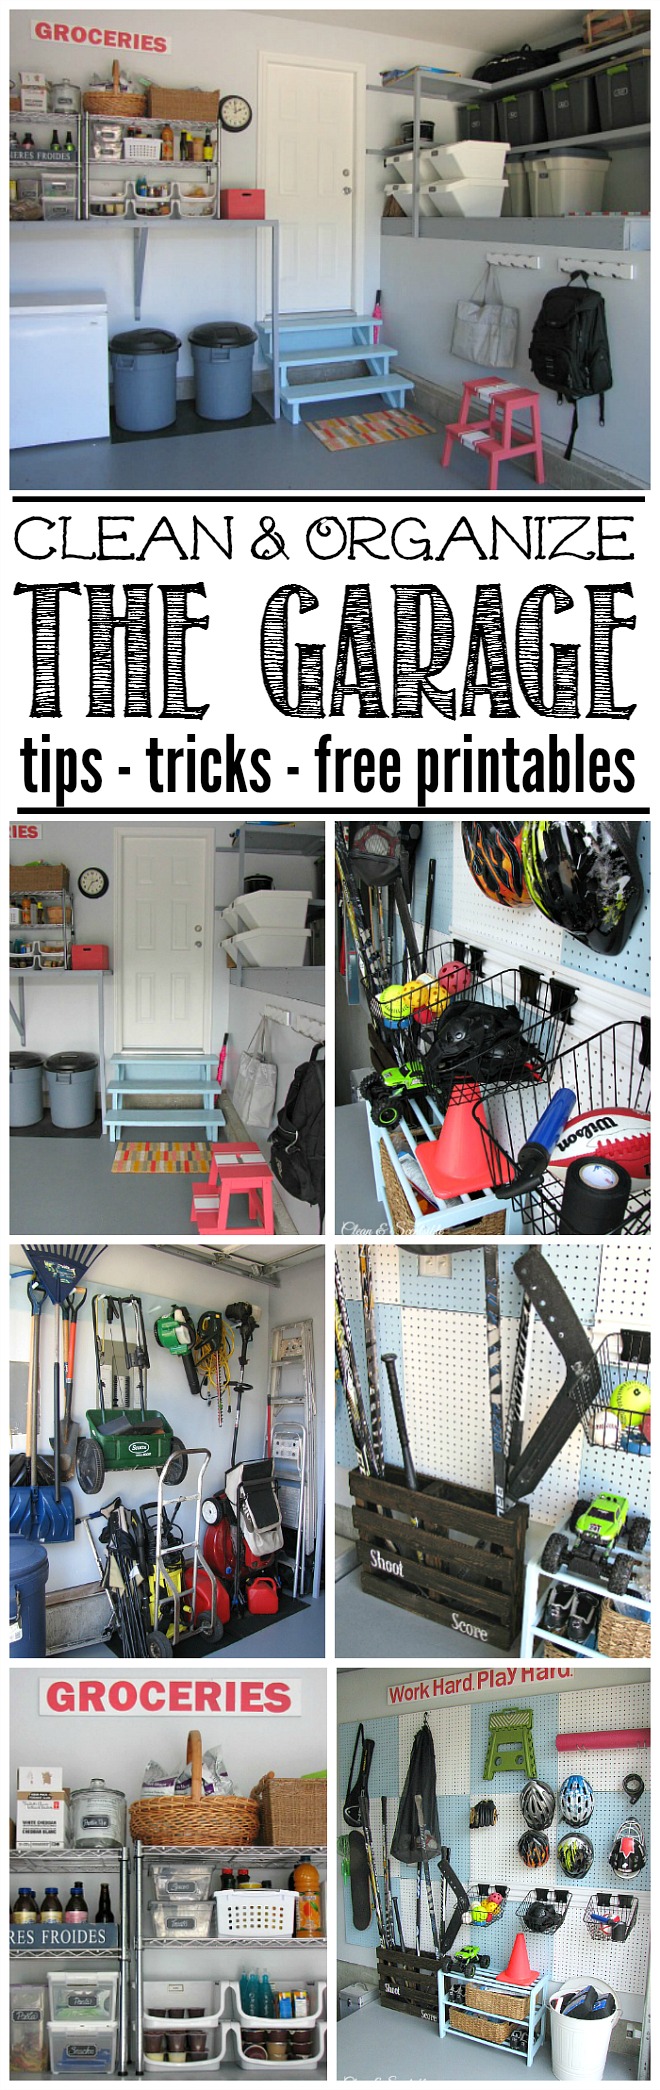 Great ideas to get your garage organized once and for all! Free printables included to keep you on track.